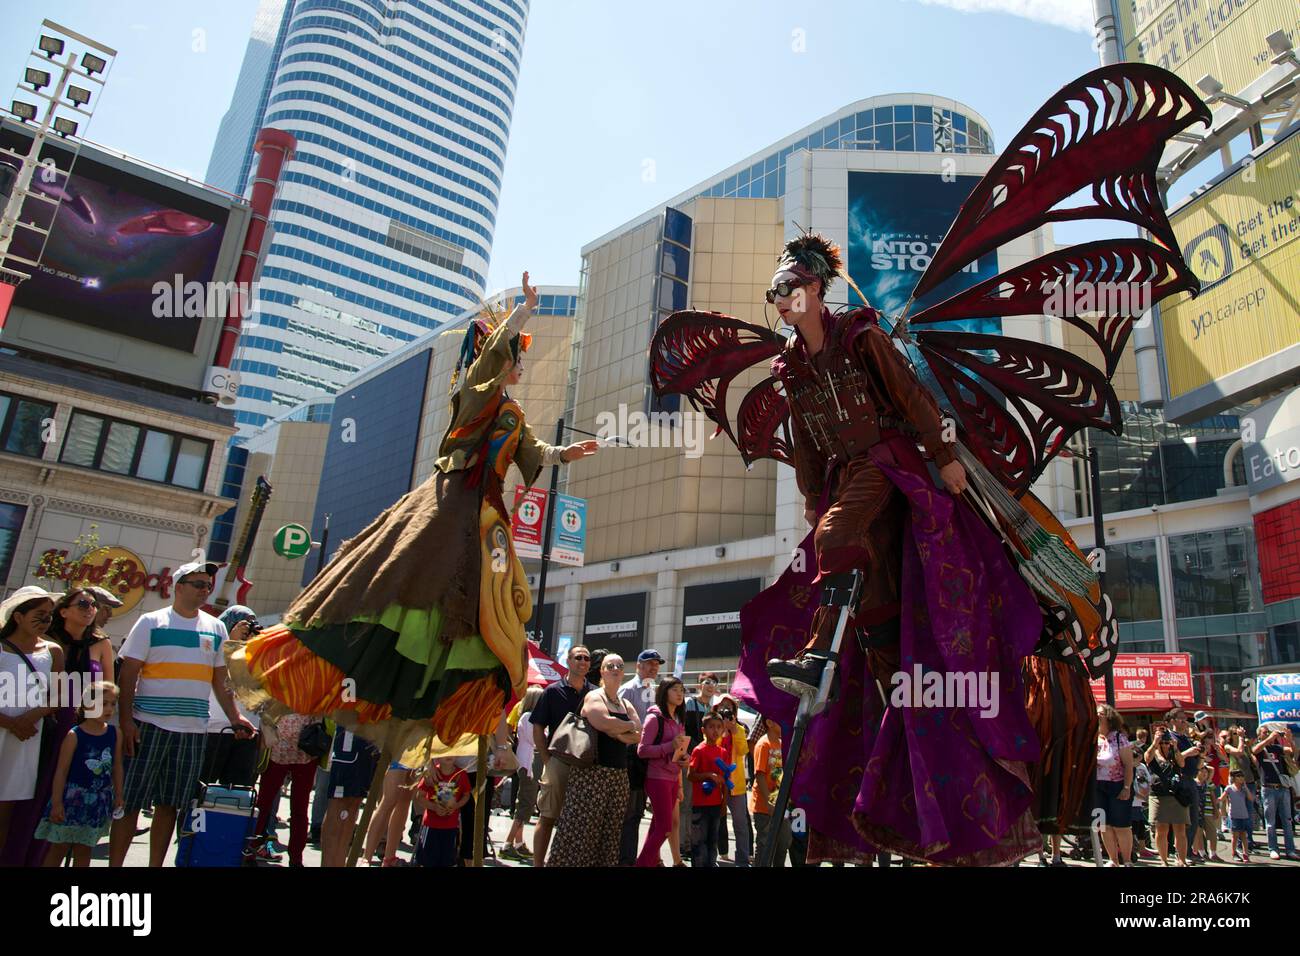 Toronto, Ontario / Canada - Aug 24, 2014: Performers on stilts with costume wing in a street festival Stock Photo